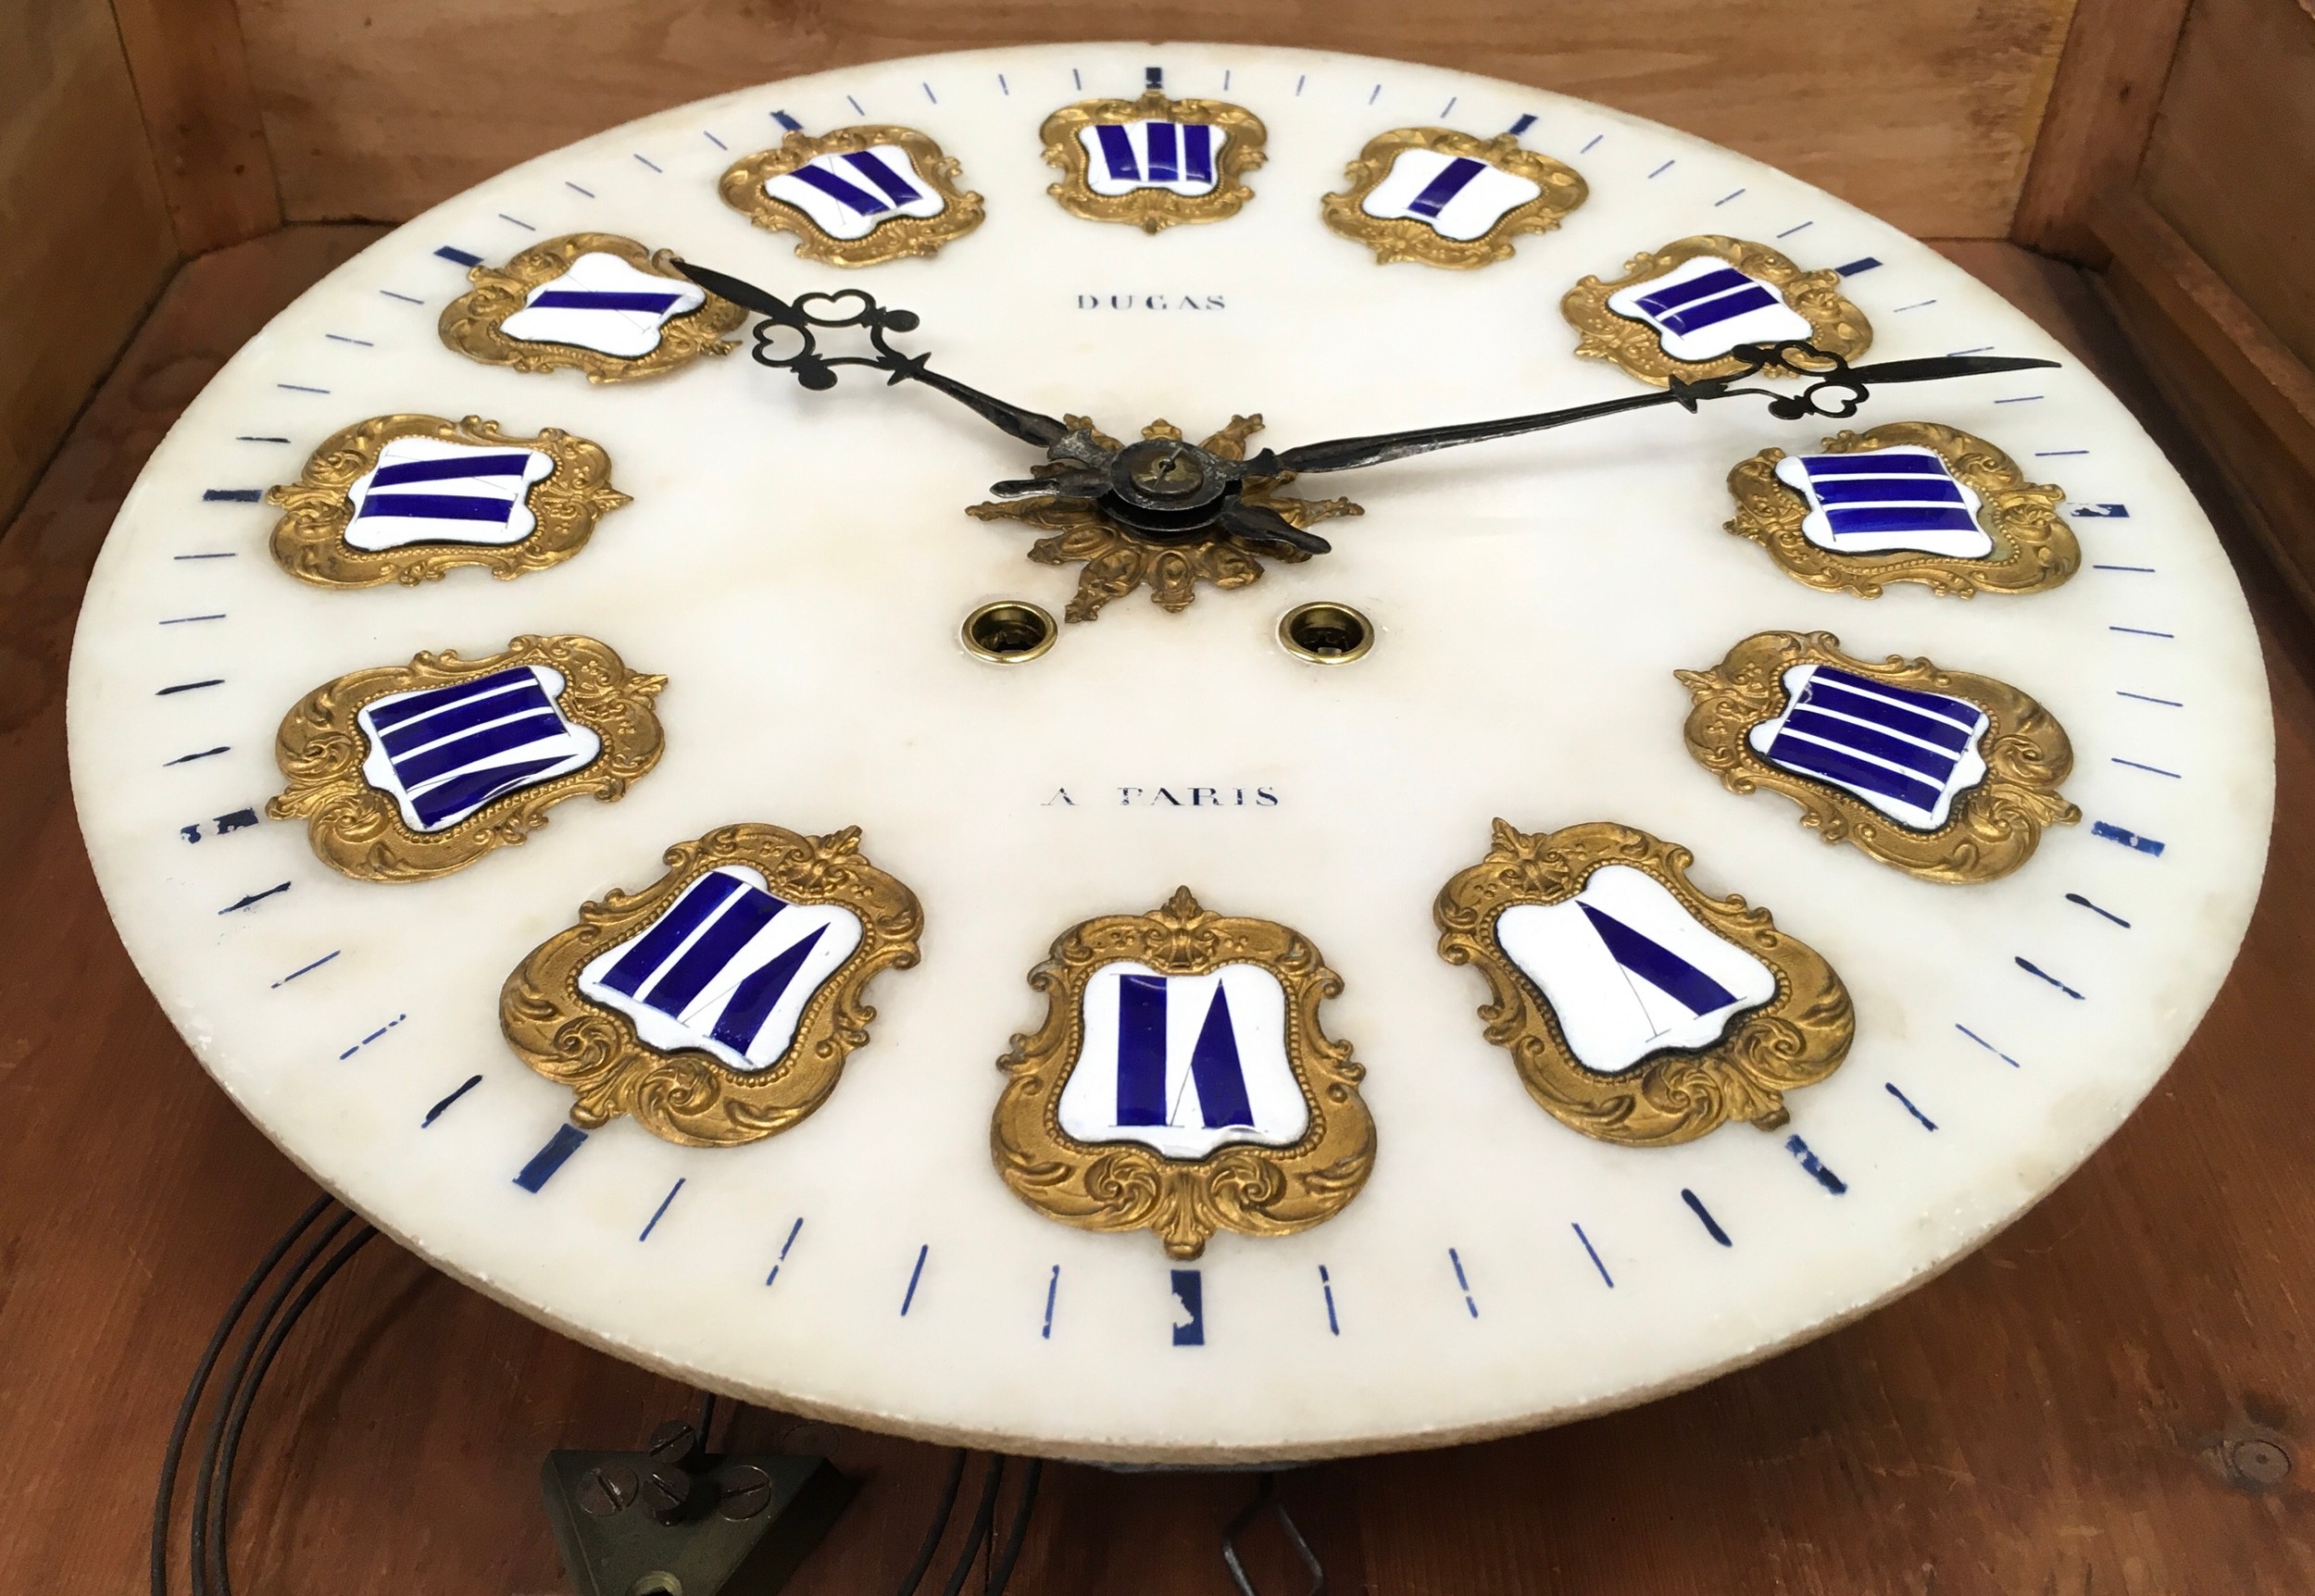 Quality wall clock with gilded enamel hour markers, signed Dugas a Paris to dial. Housed in a glazed - Image 3 of 9